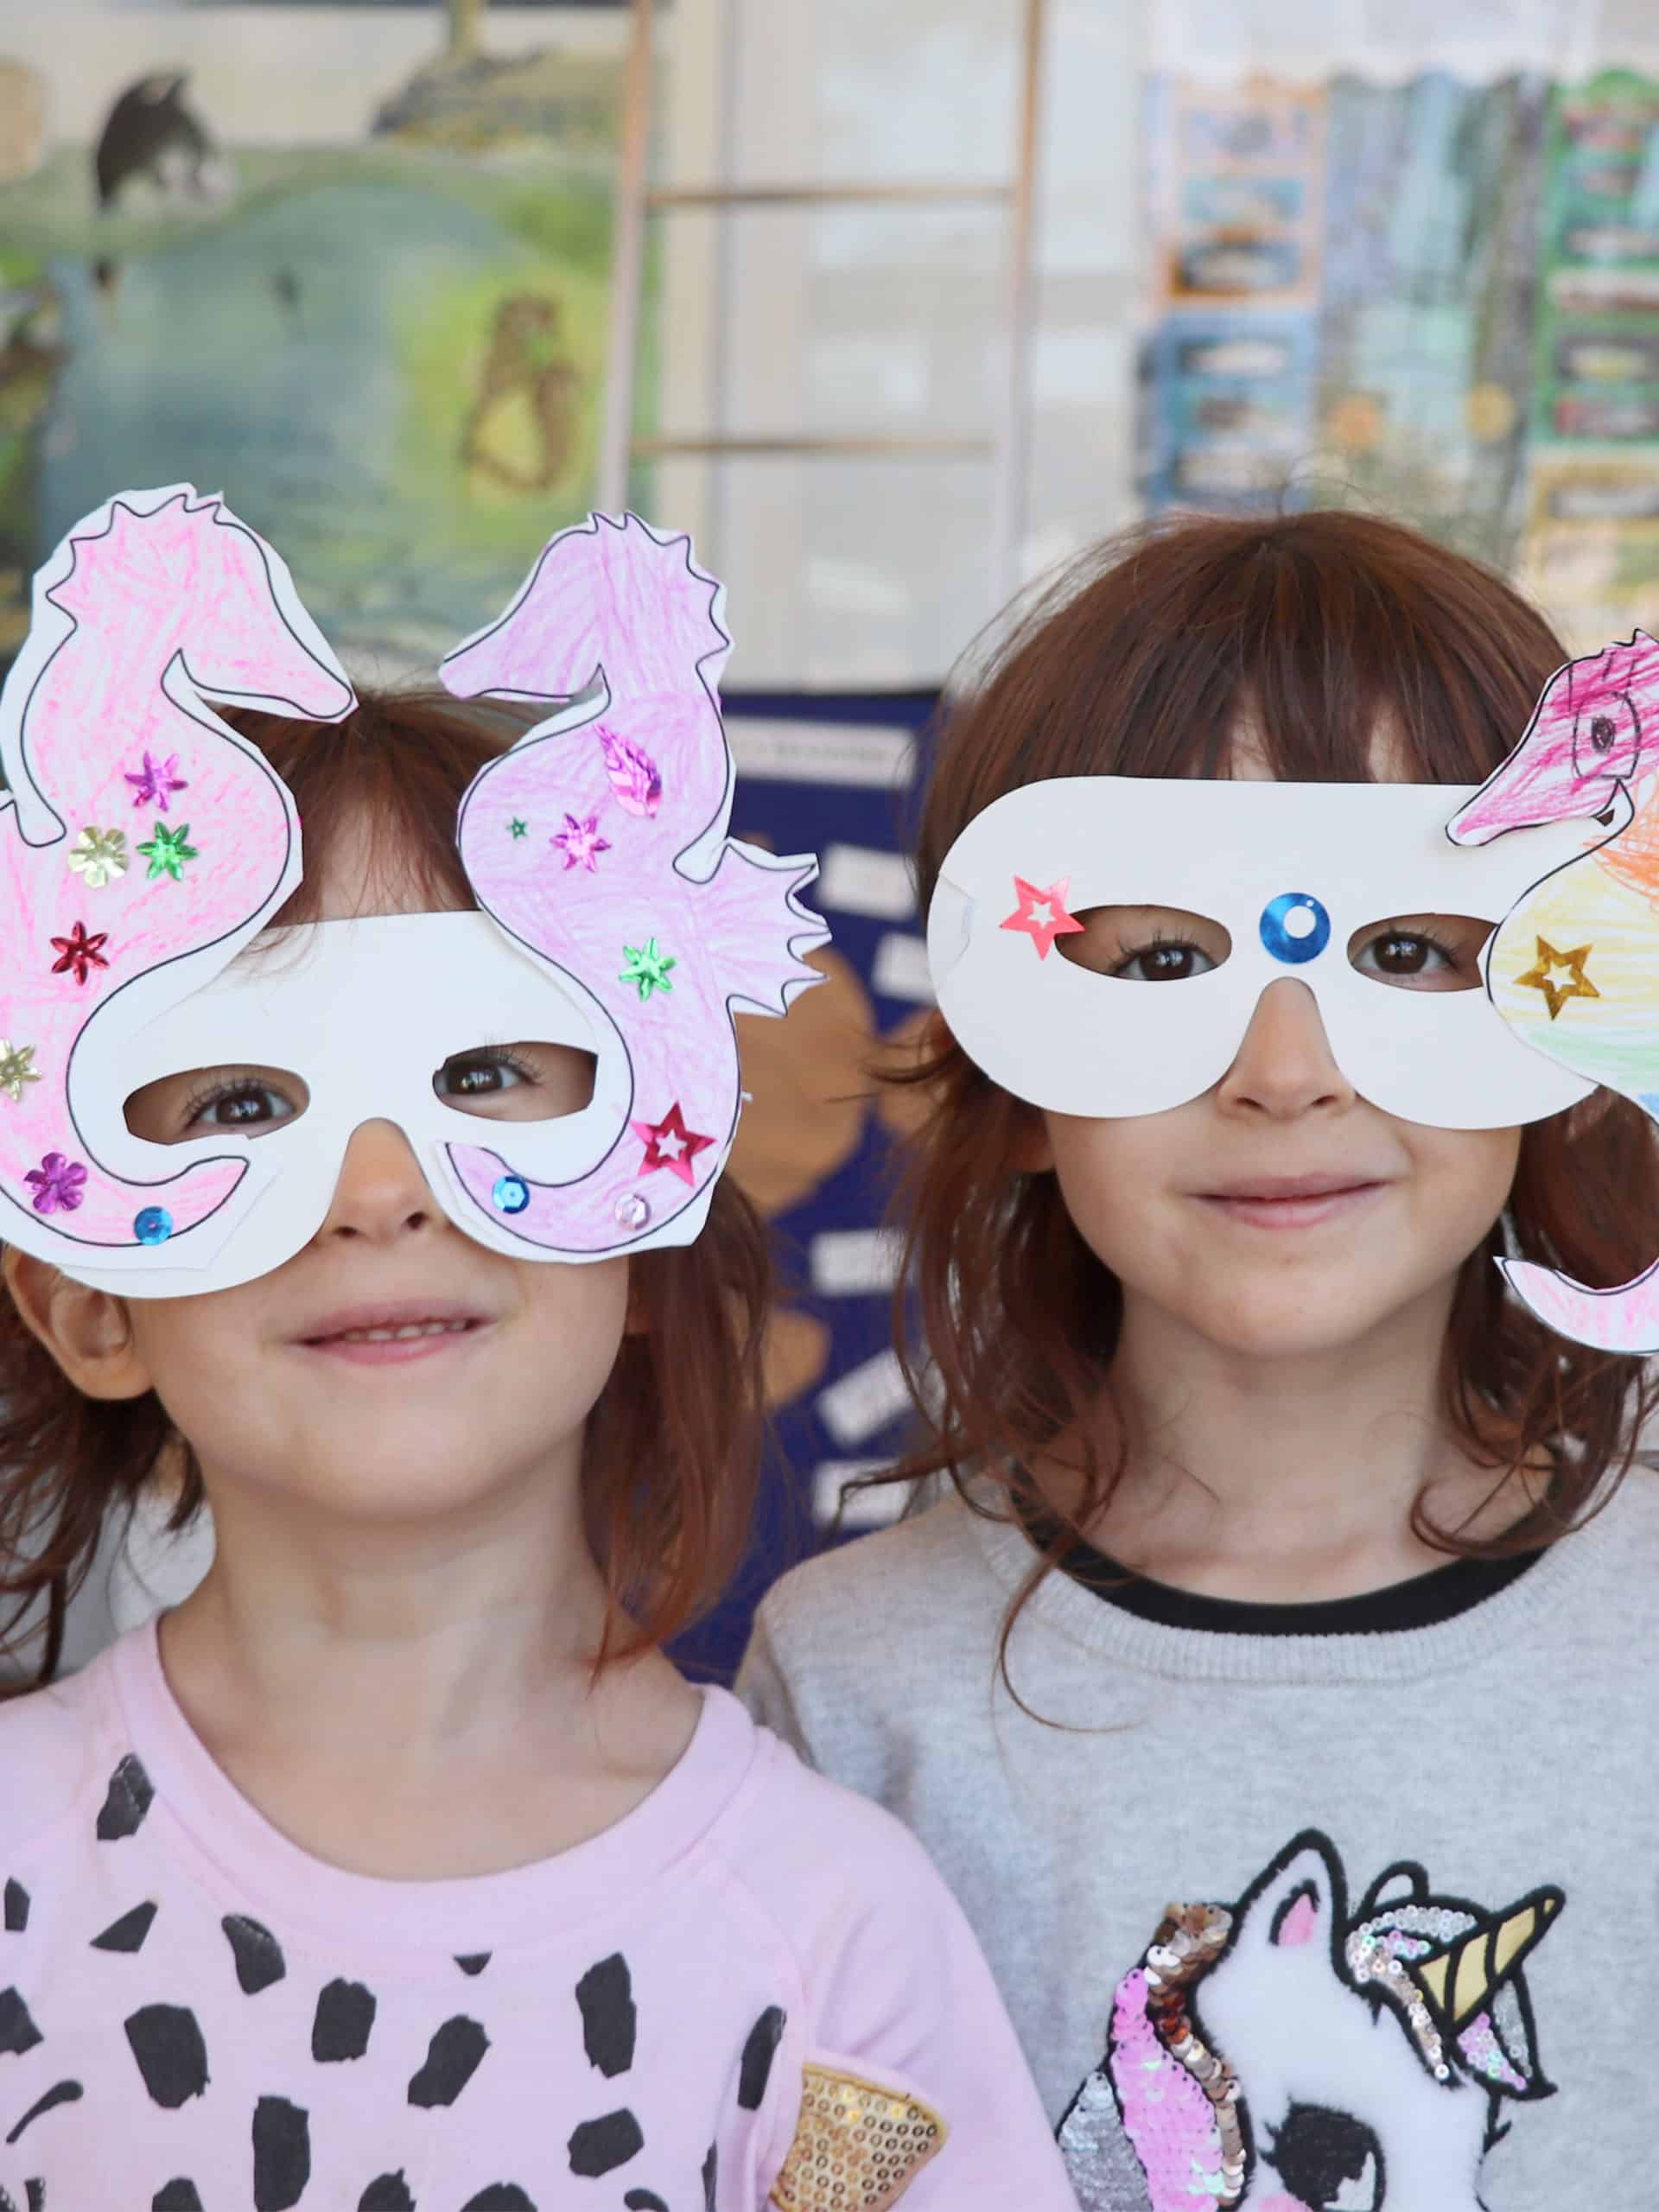 Two girls in paper masks in a classroom.